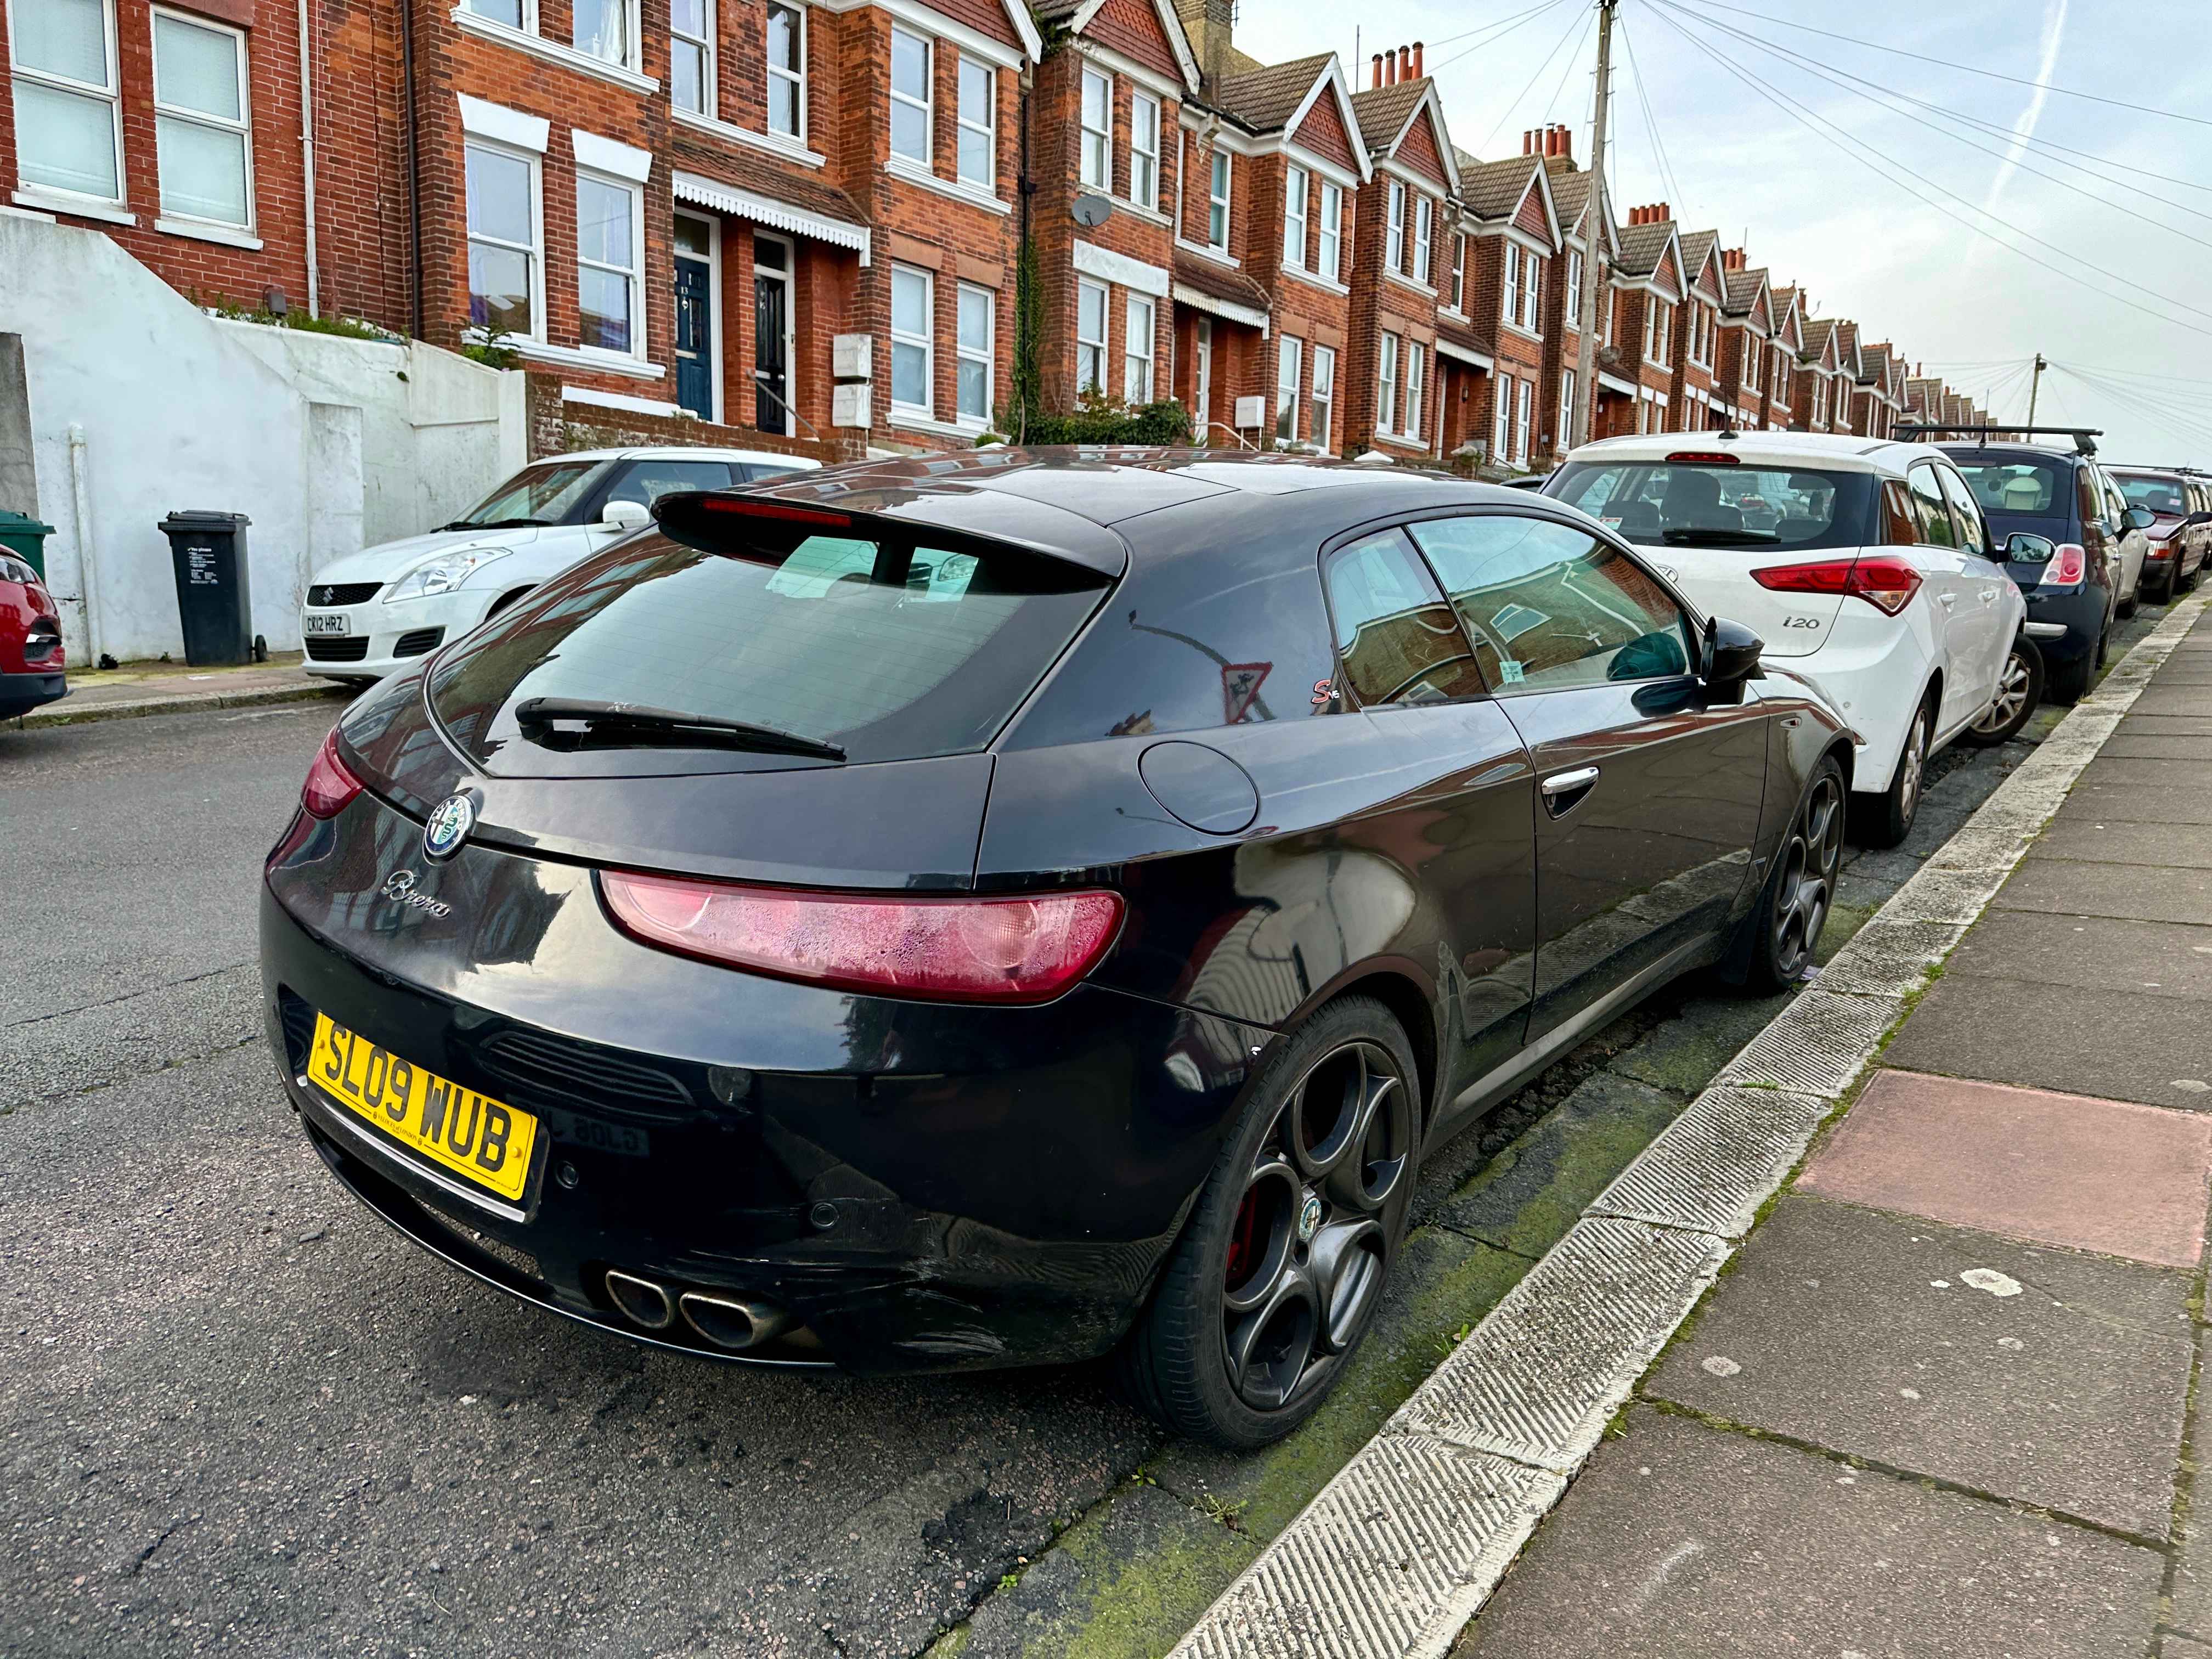 Photograph of SL09 WUB - a Black Alfa Romeo Brera parked in Hollingdean by a non-resident. The fifteenth of twenty photographs supplied by the residents of Hollingdean.